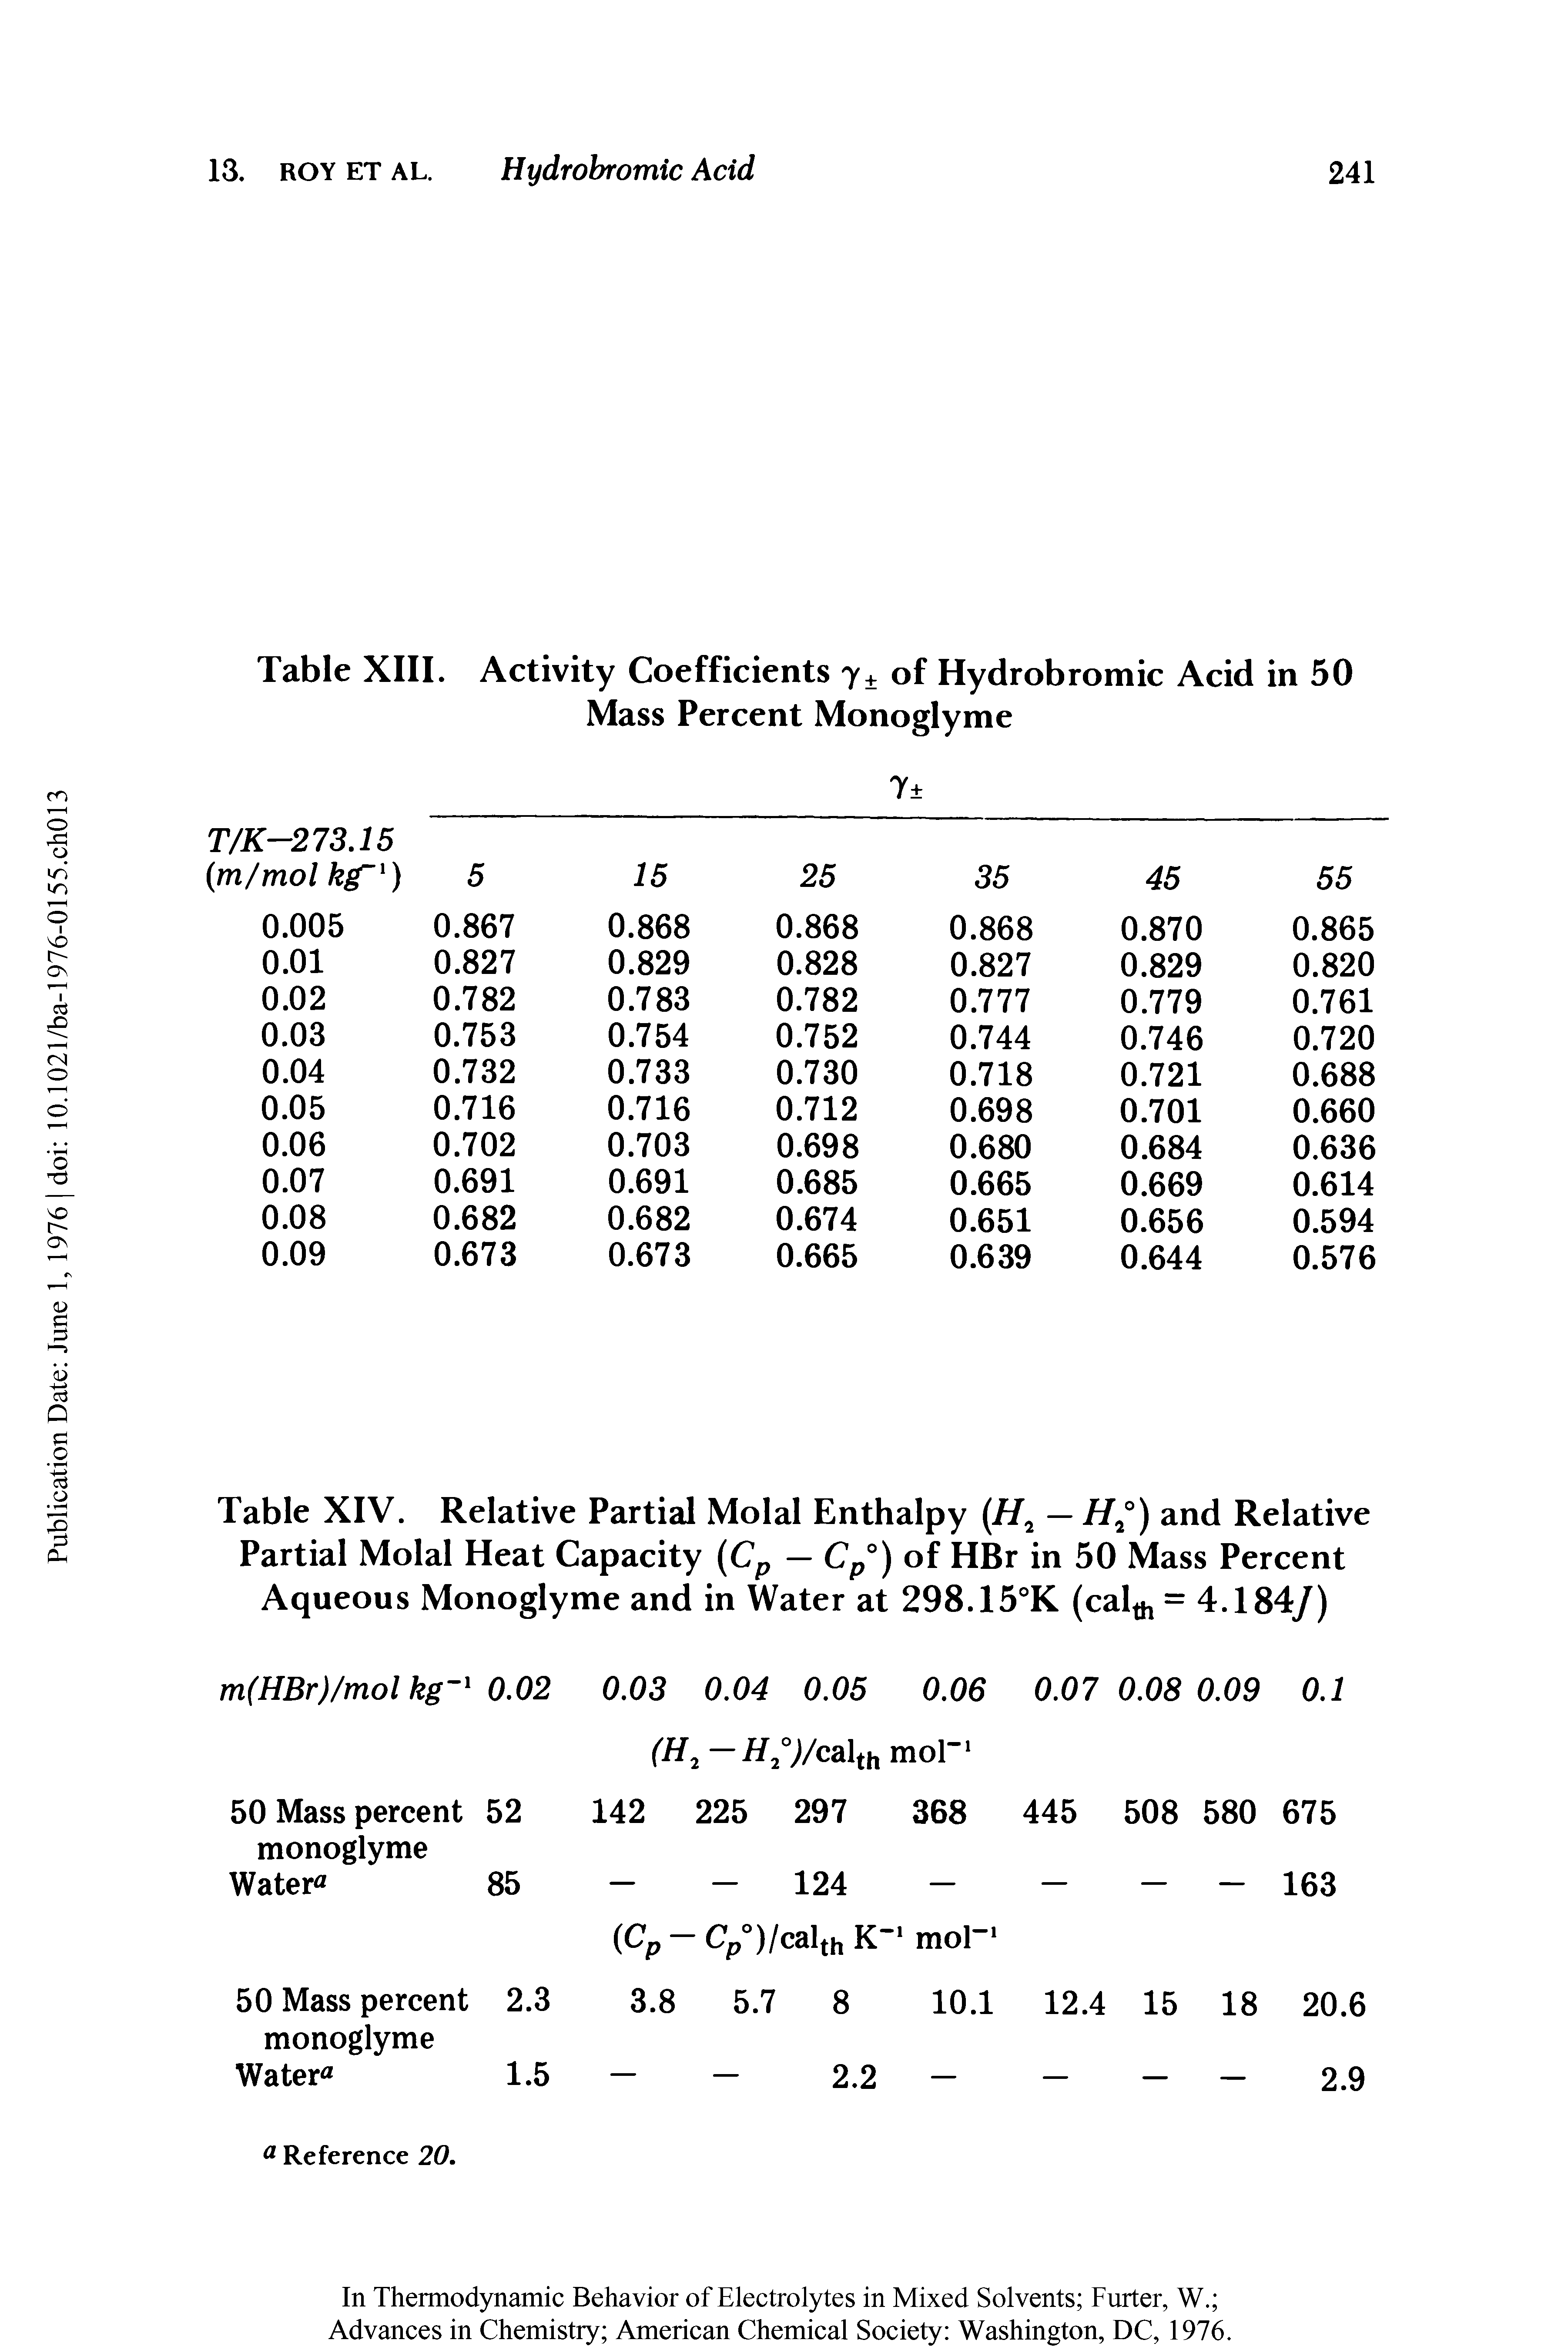 Table XIV. Relative Partial Molal Enthalpy (//2 — H°) and Relative Partial Molal Heat Capacity (Cp — Cp°) of HBr in 50 Mass Percent Aqueous Monoglyme and in Water at 298.15°K (cal = 4.184/)...